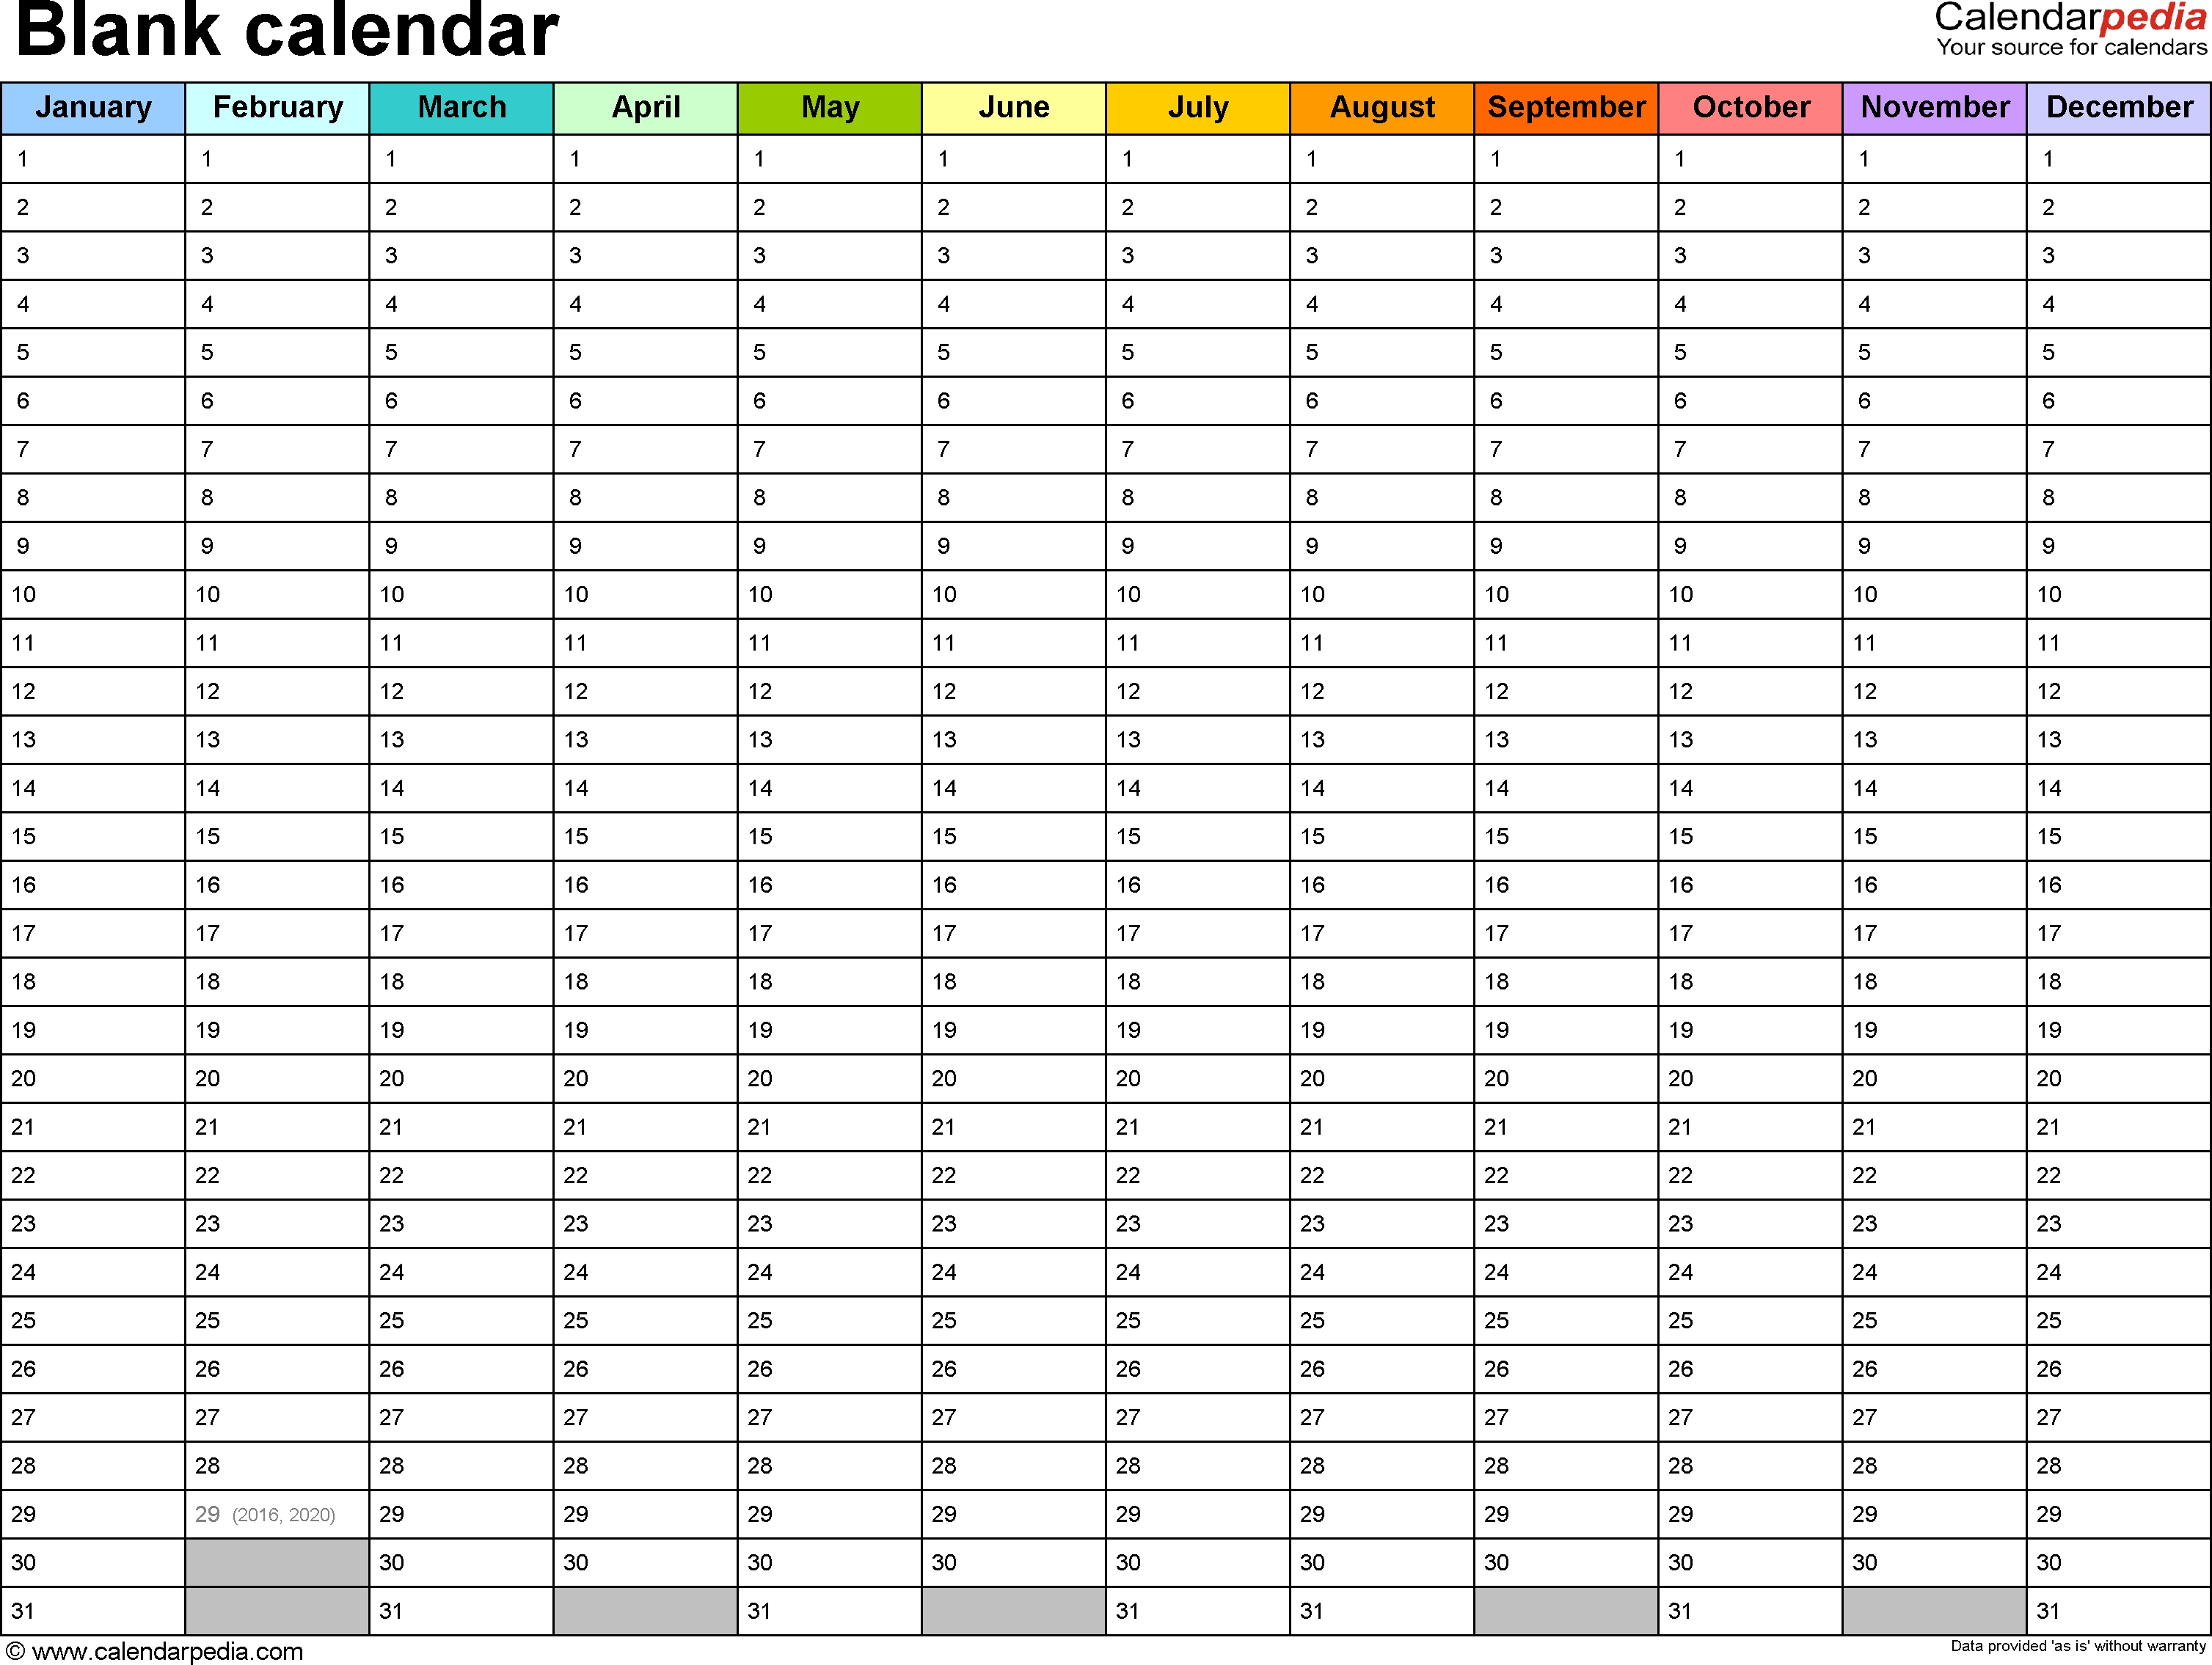 Blank Calendar - 9 Free Printable Microsoft Word Templates intended for Year At A Glance Template